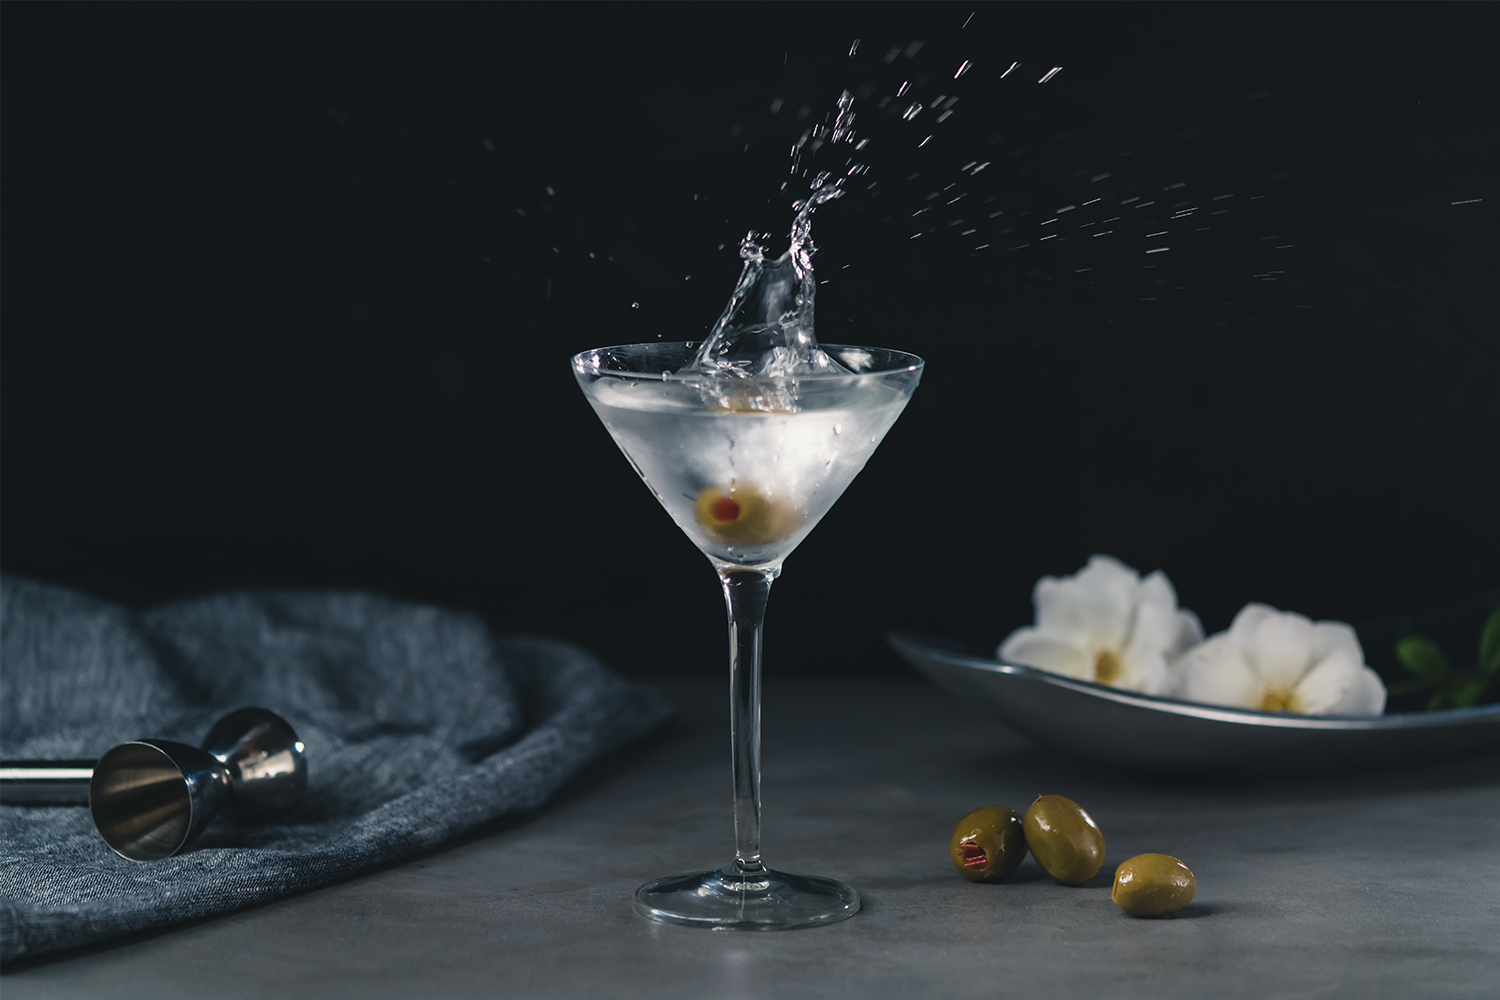 A gin martini with an olive thrown in the glass